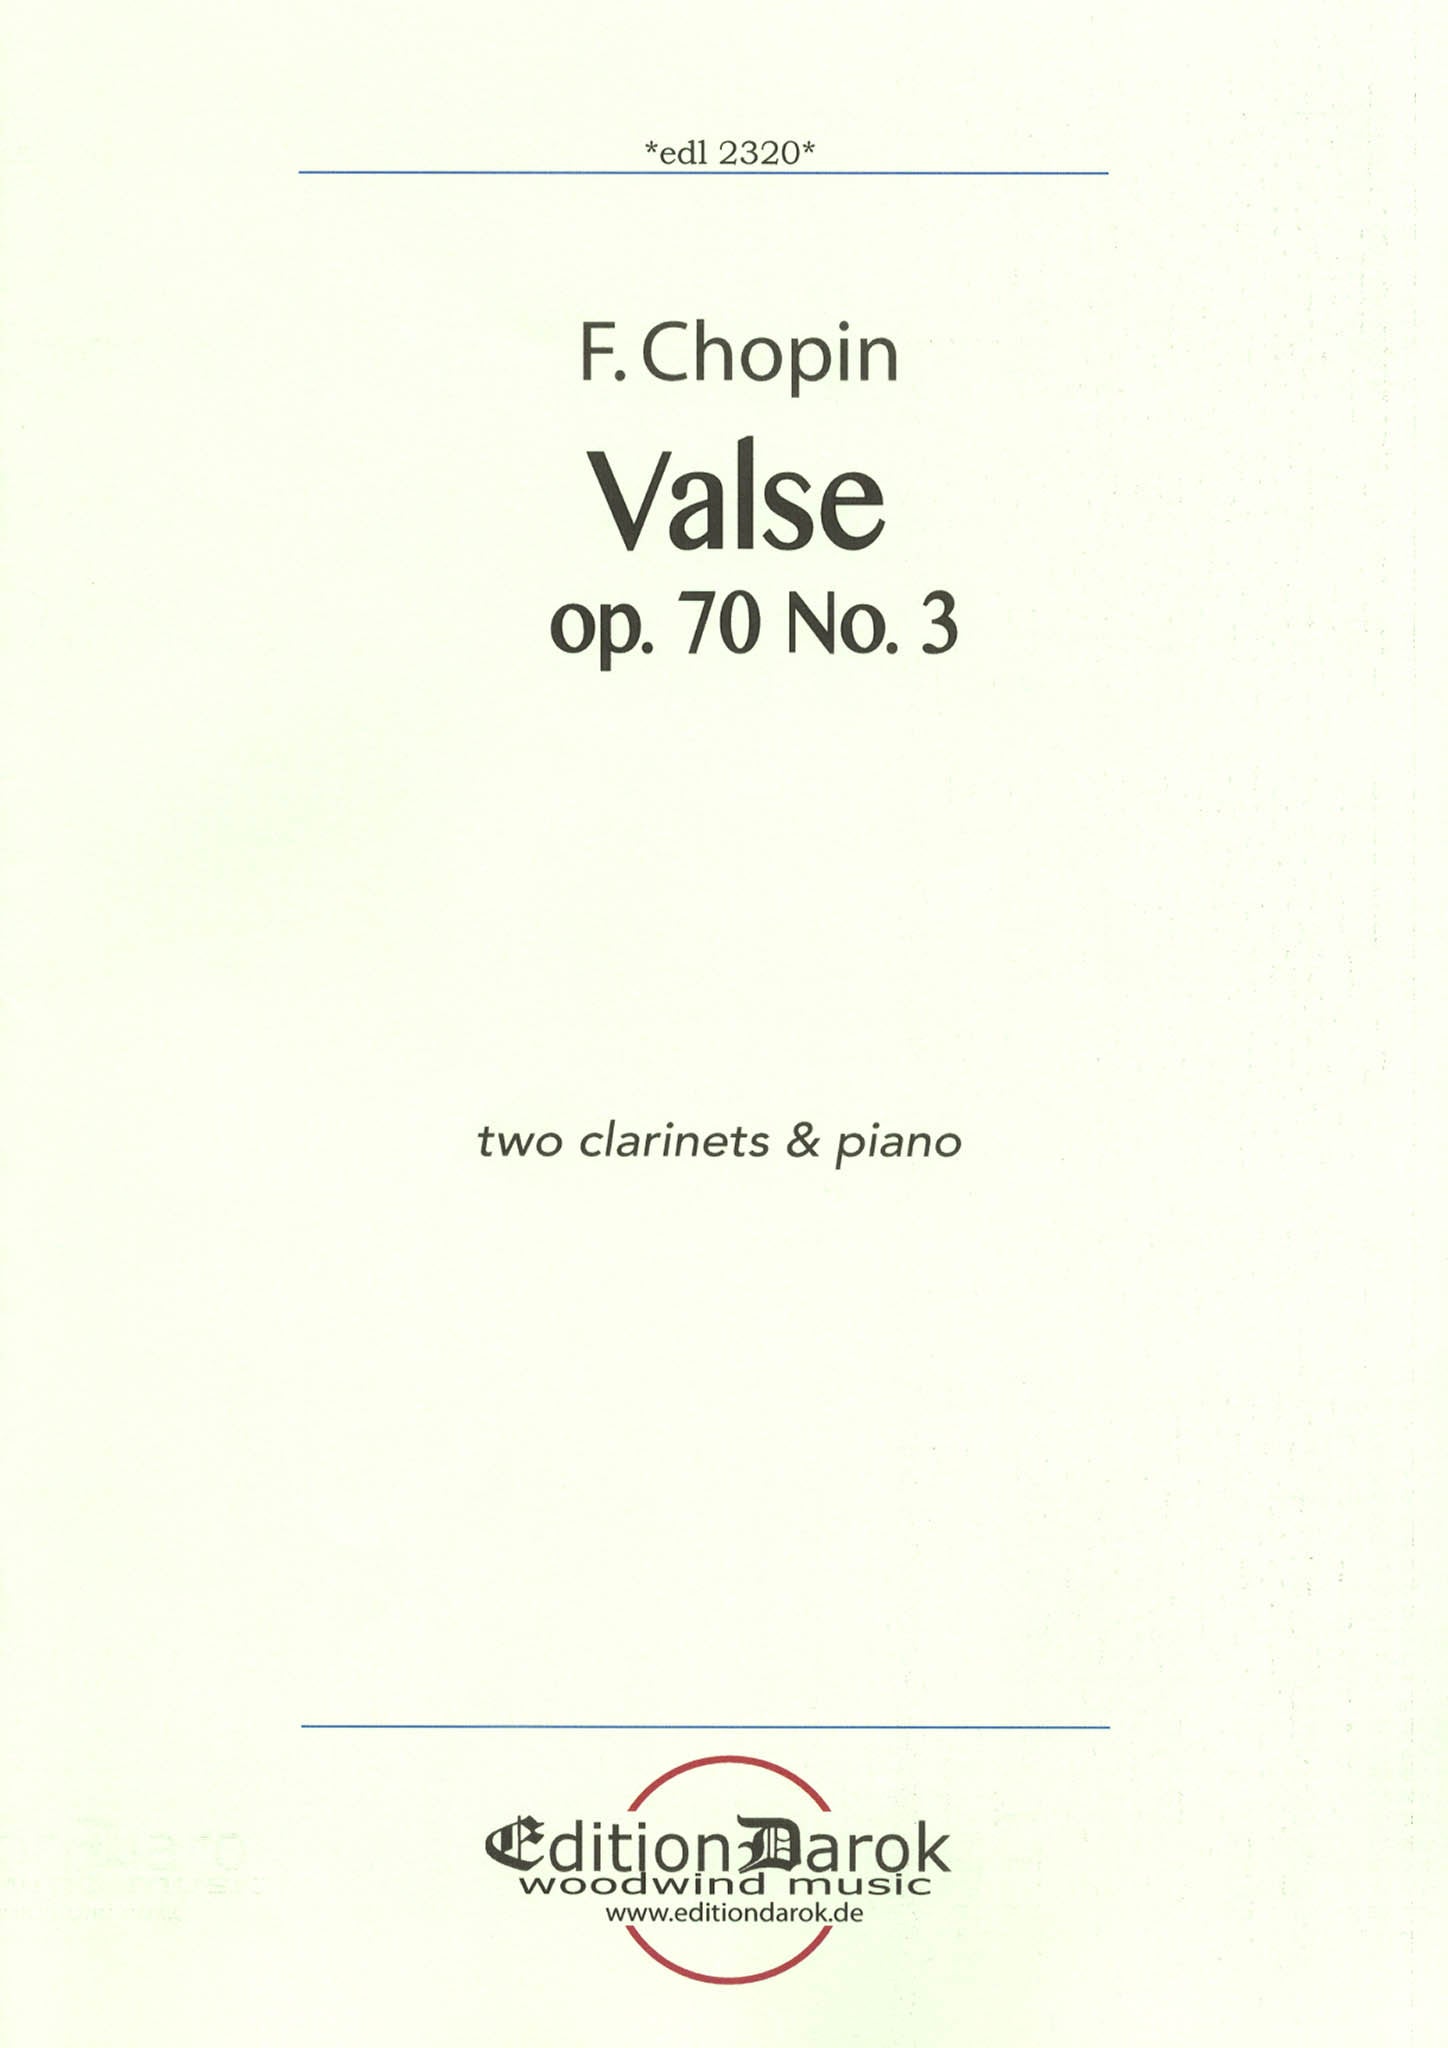 Chopin Waltz, Op. 70 No. 3 for 2 clarinets & piano Cover